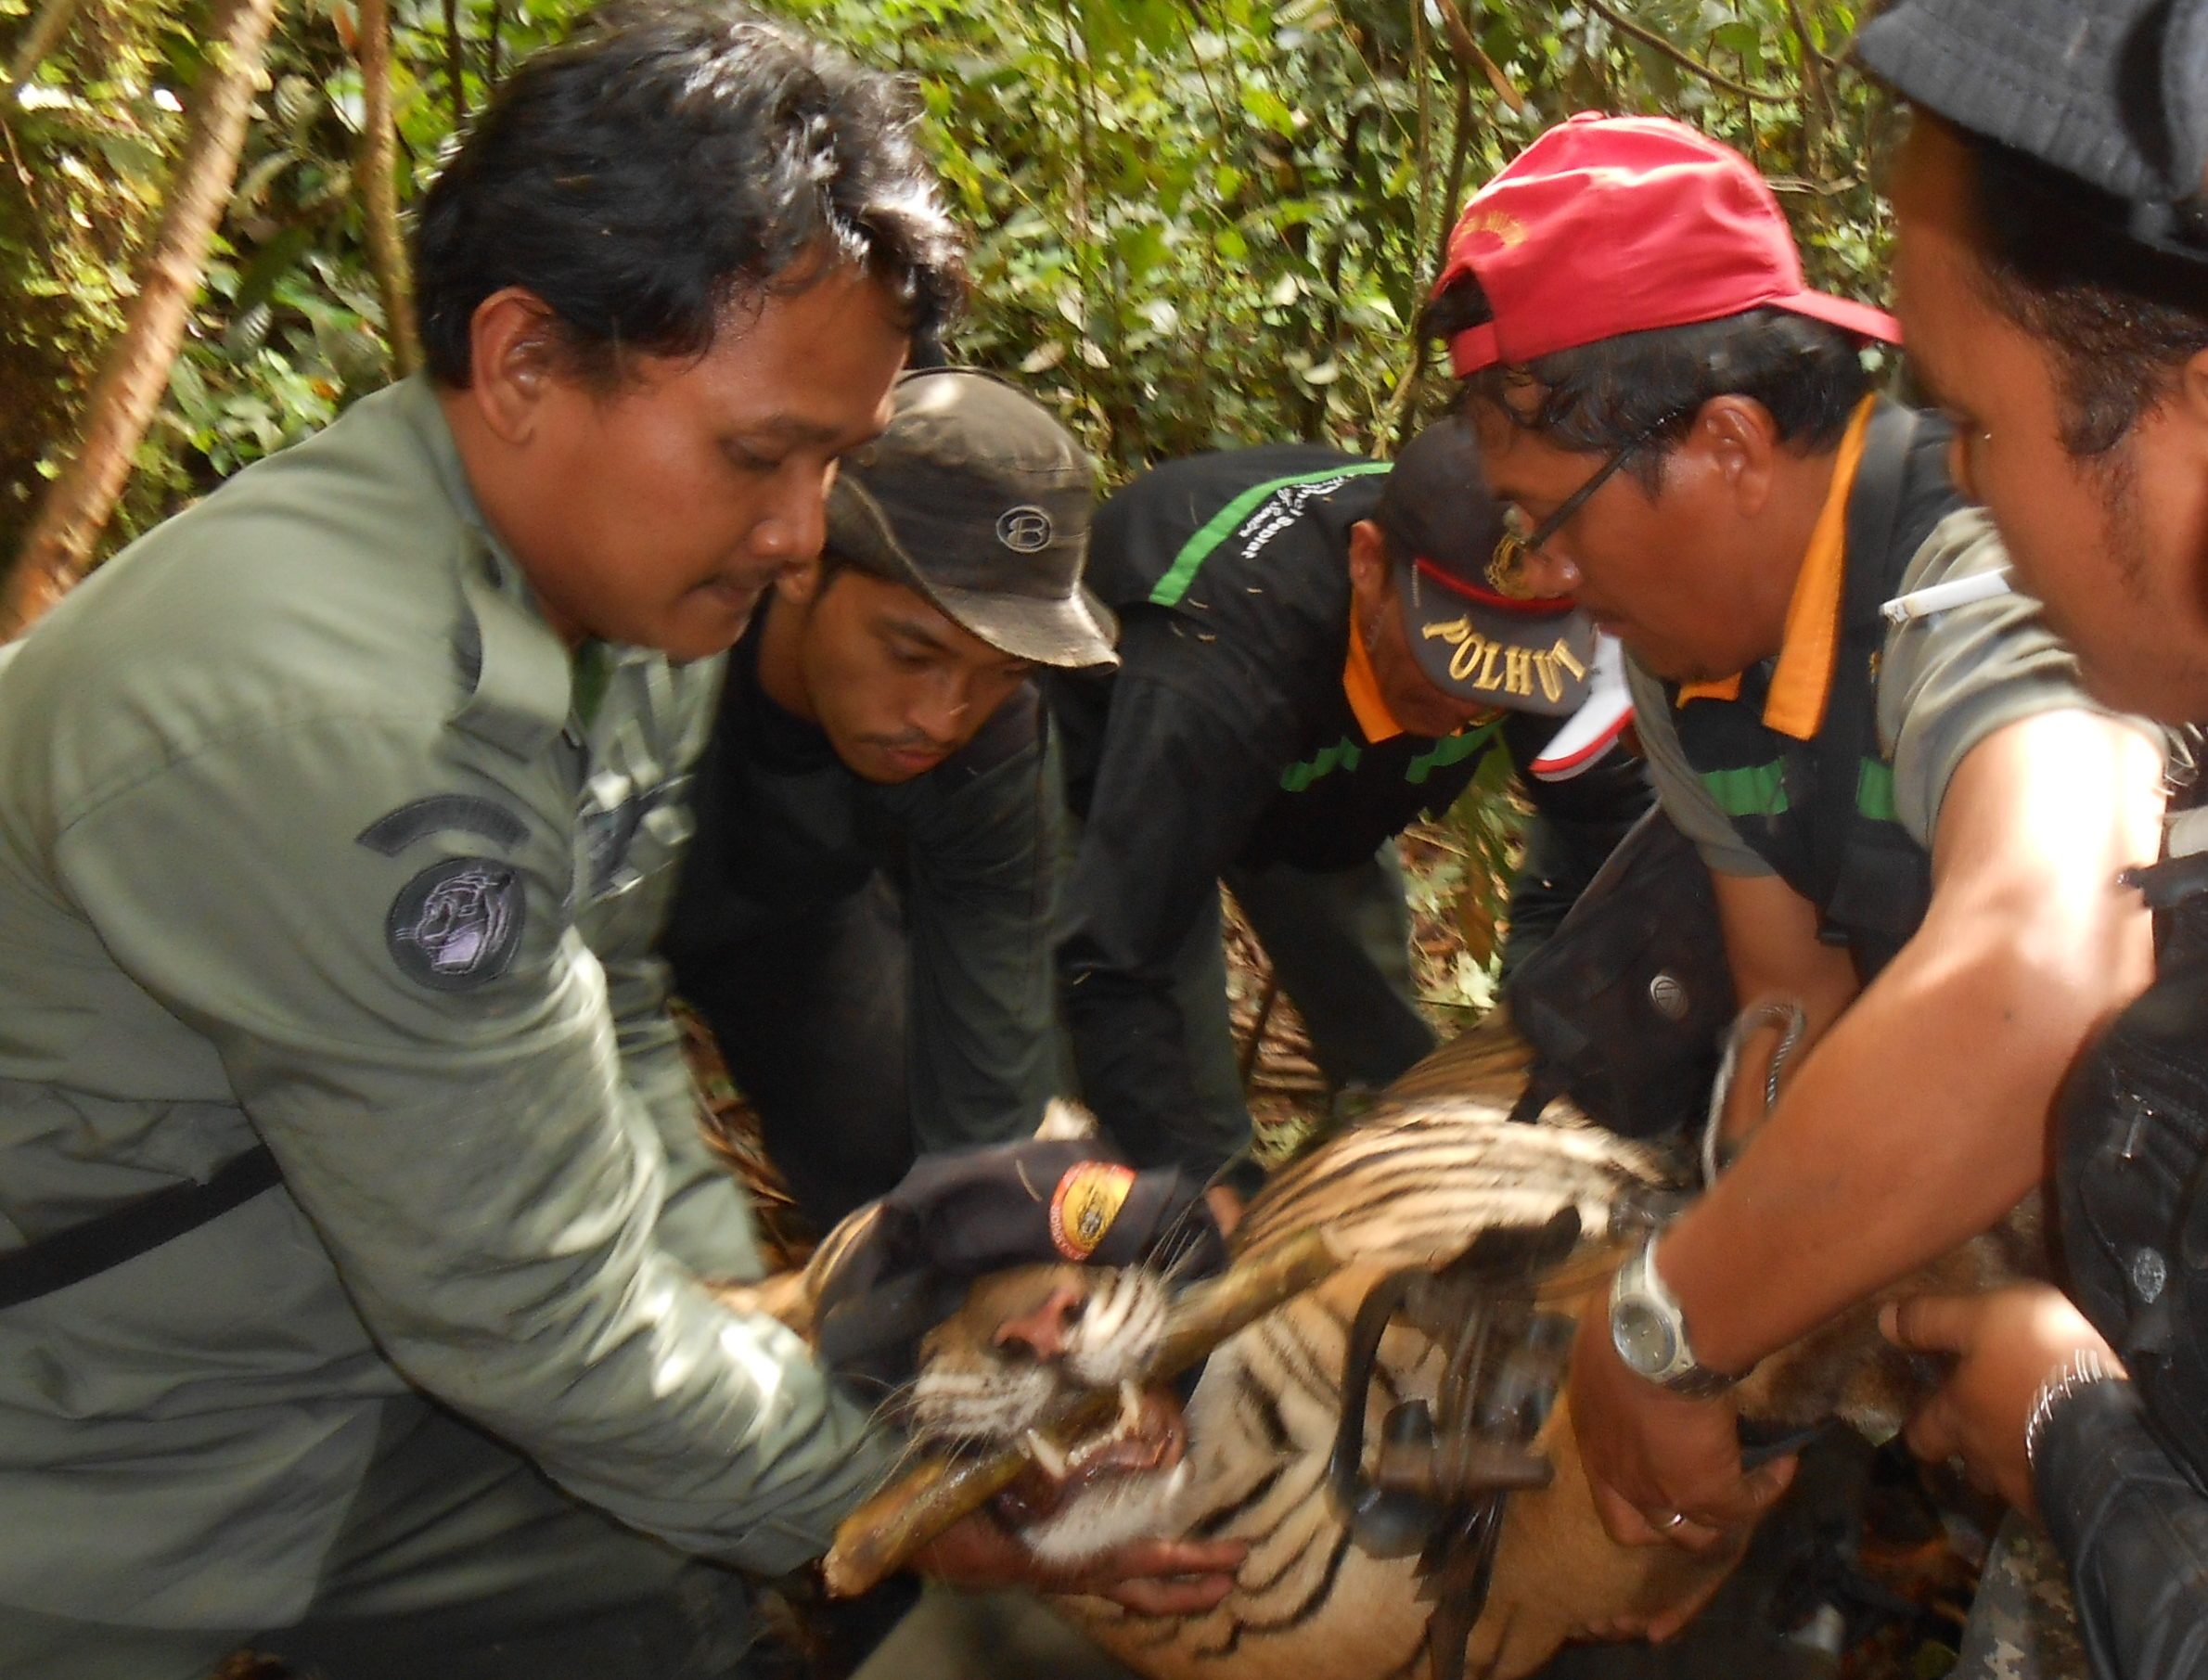 Rangers rescuing a tiger from a snare in Indonesia in 2014 ©FFI